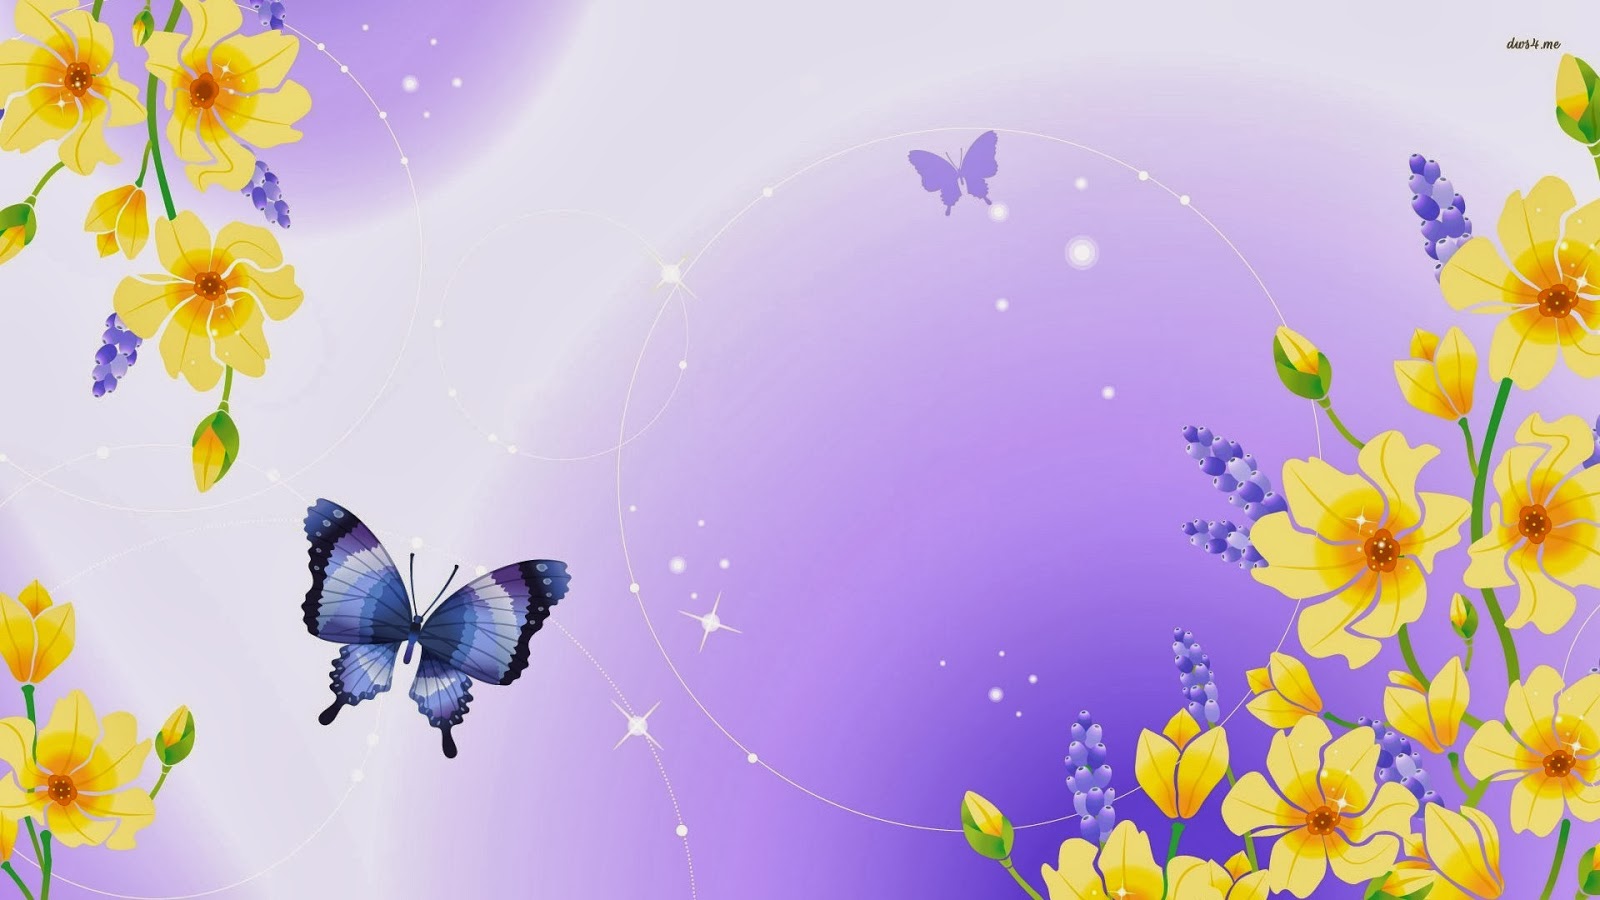 Cute Butterfly Image Wallpaper Click Image To